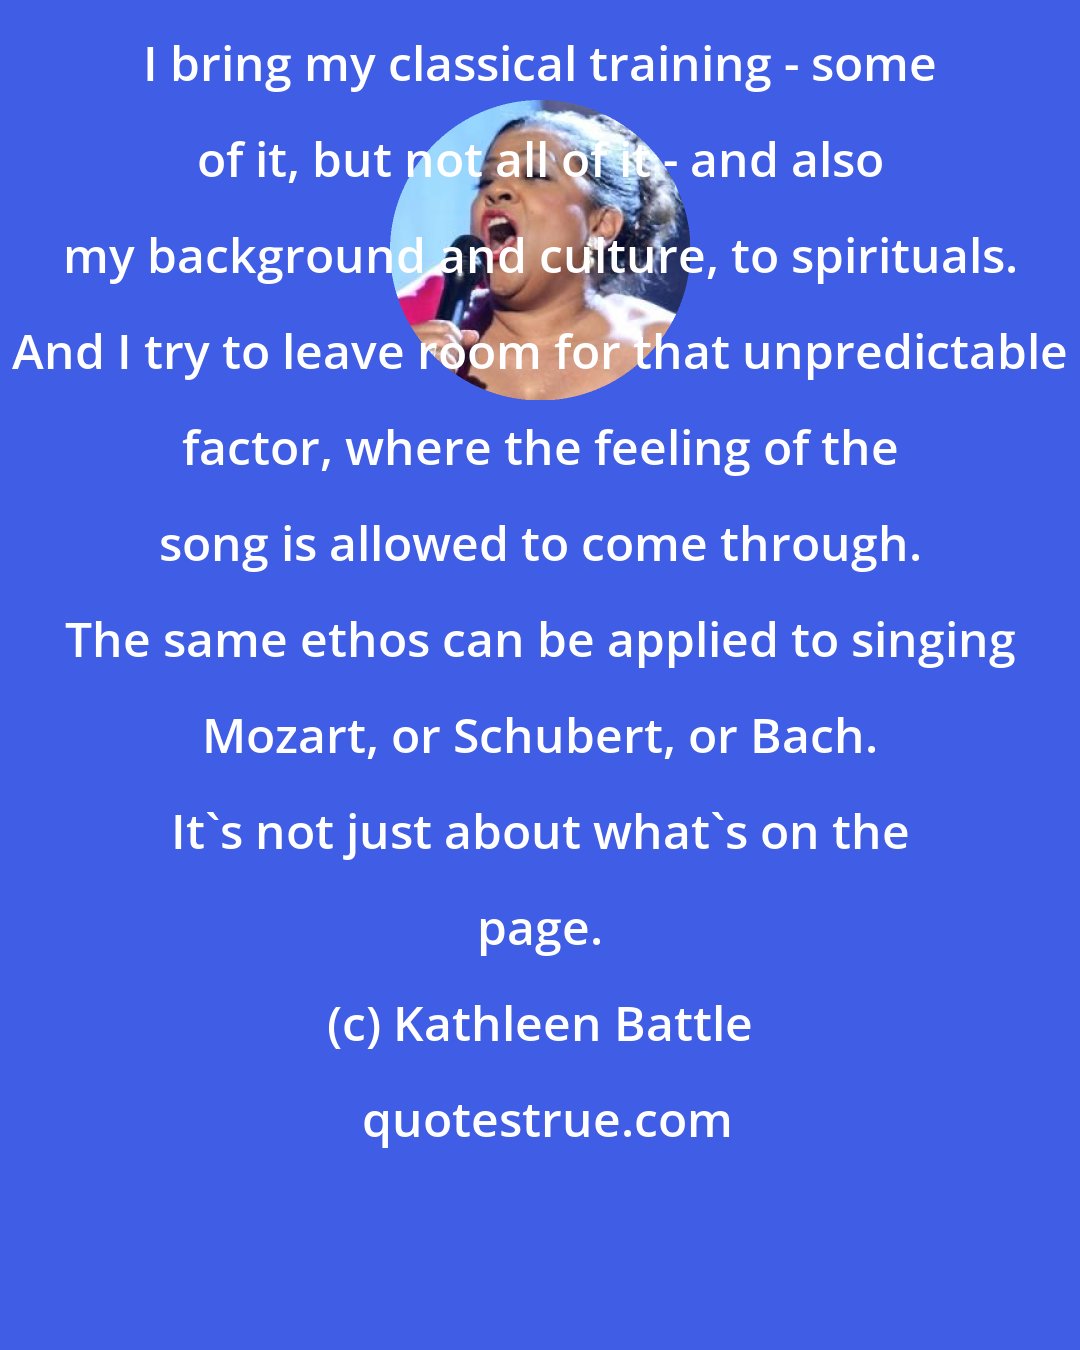 Kathleen Battle: I bring my classical training - some of it, but not all of it - and also my background and culture, to spirituals. And I try to leave room for that unpredictable factor, where the feeling of the song is allowed to come through. The same ethos can be applied to singing Mozart, or Schubert, or Bach. It's not just about what's on the page.